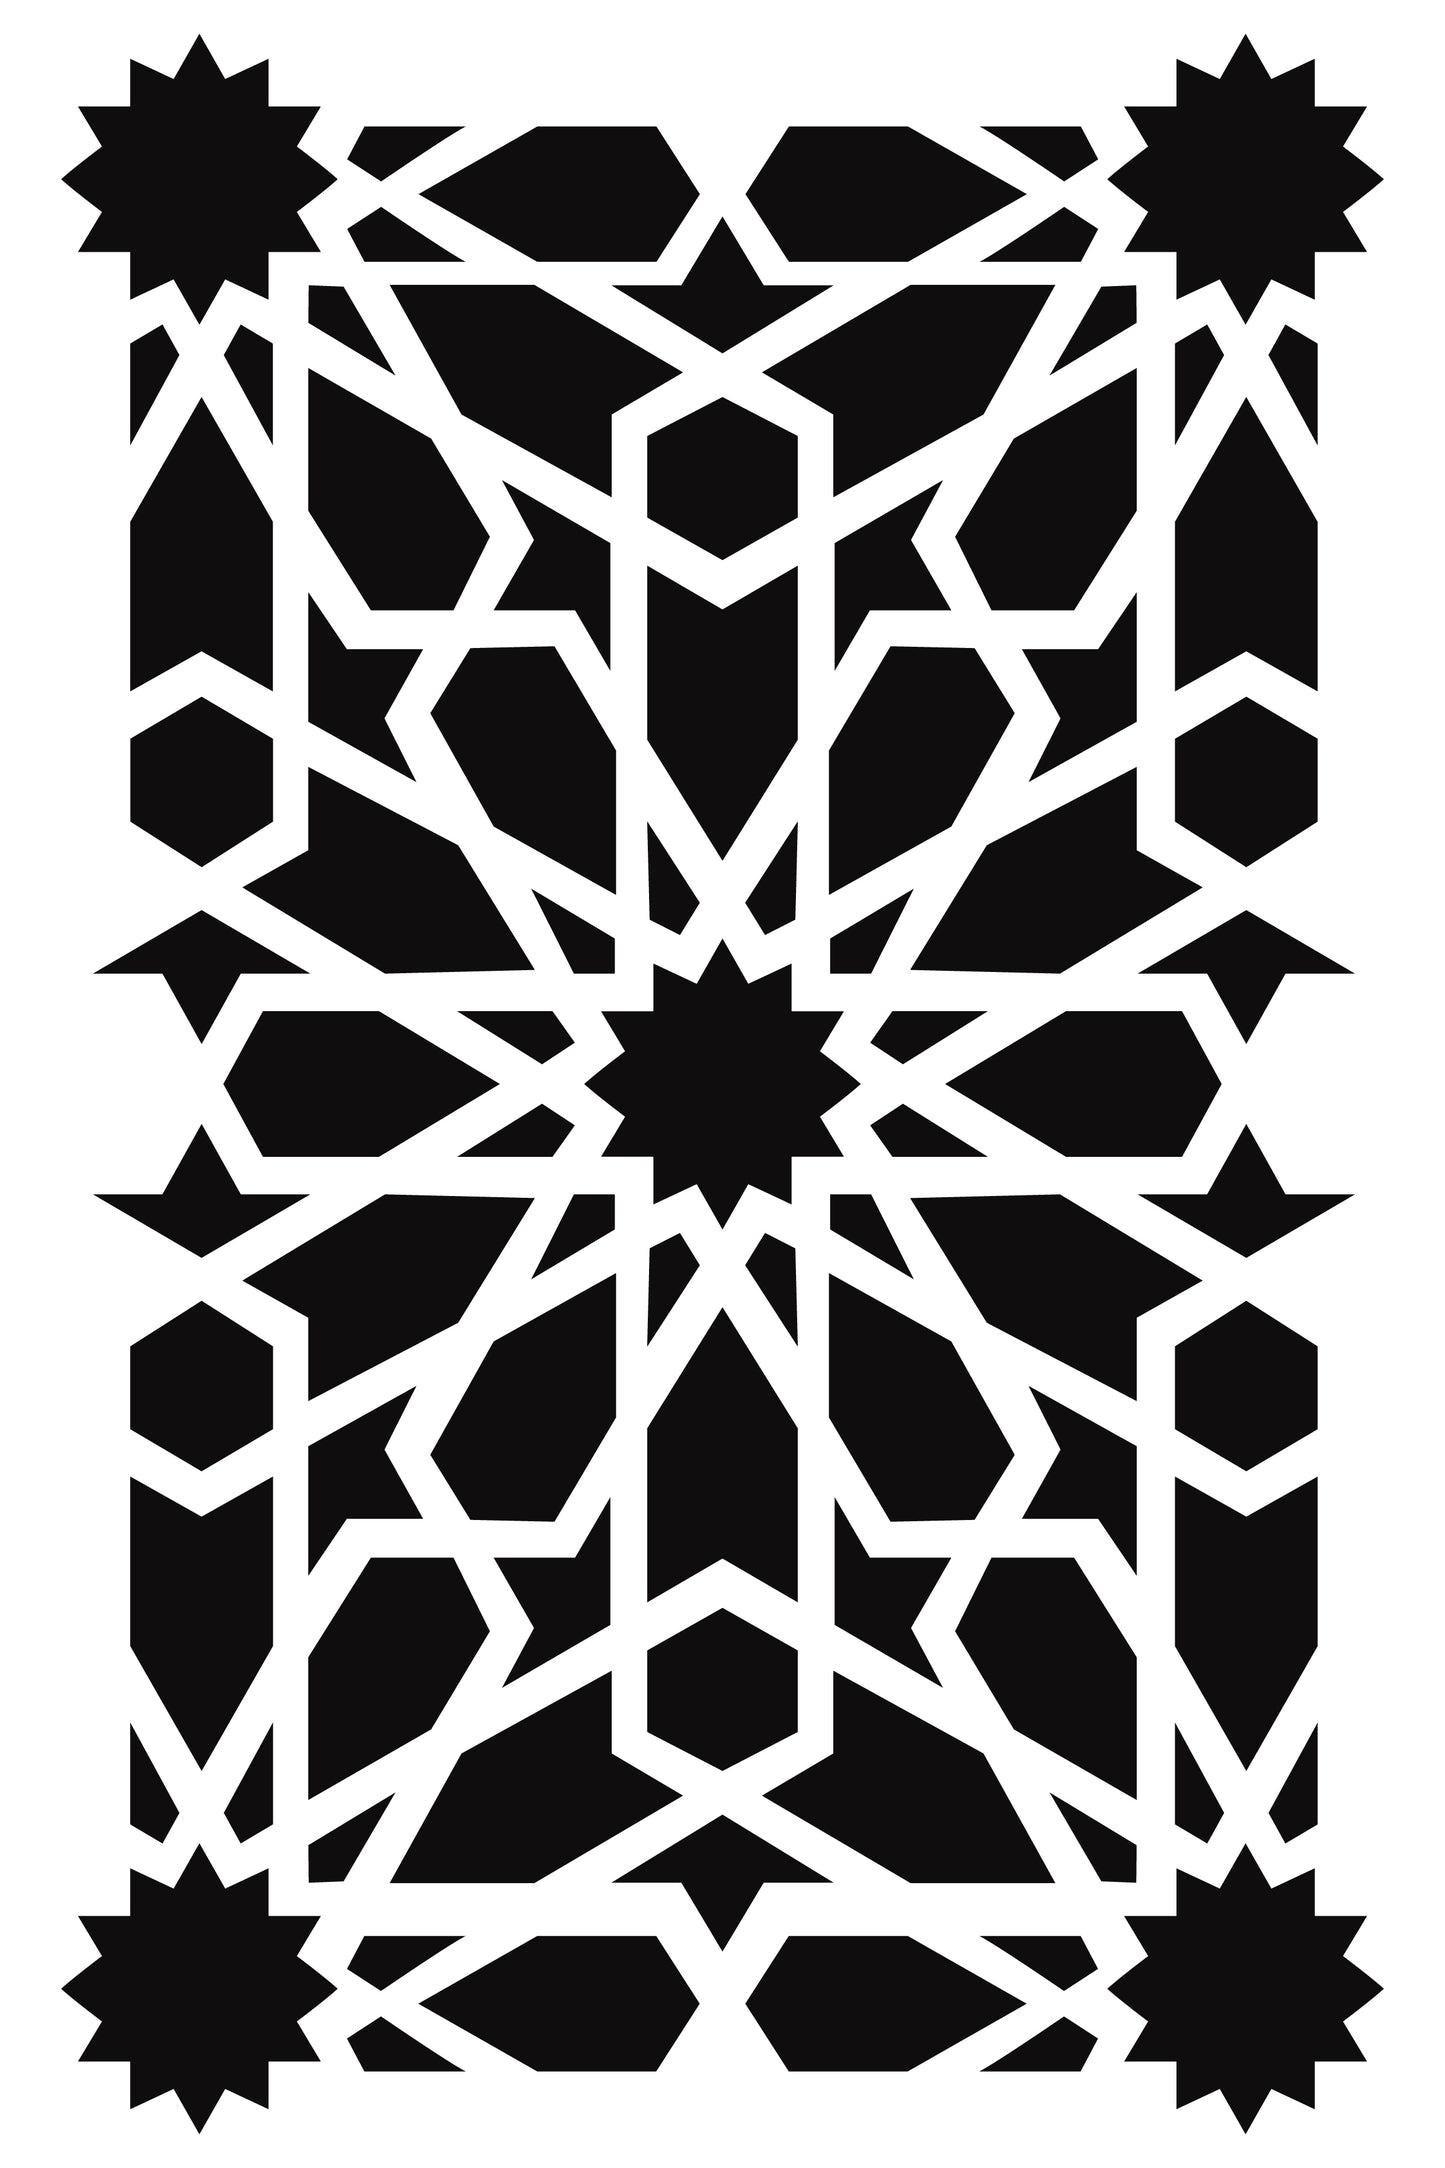 Multi-Magic Design Stencil for Wall Painting (KDMD1476)